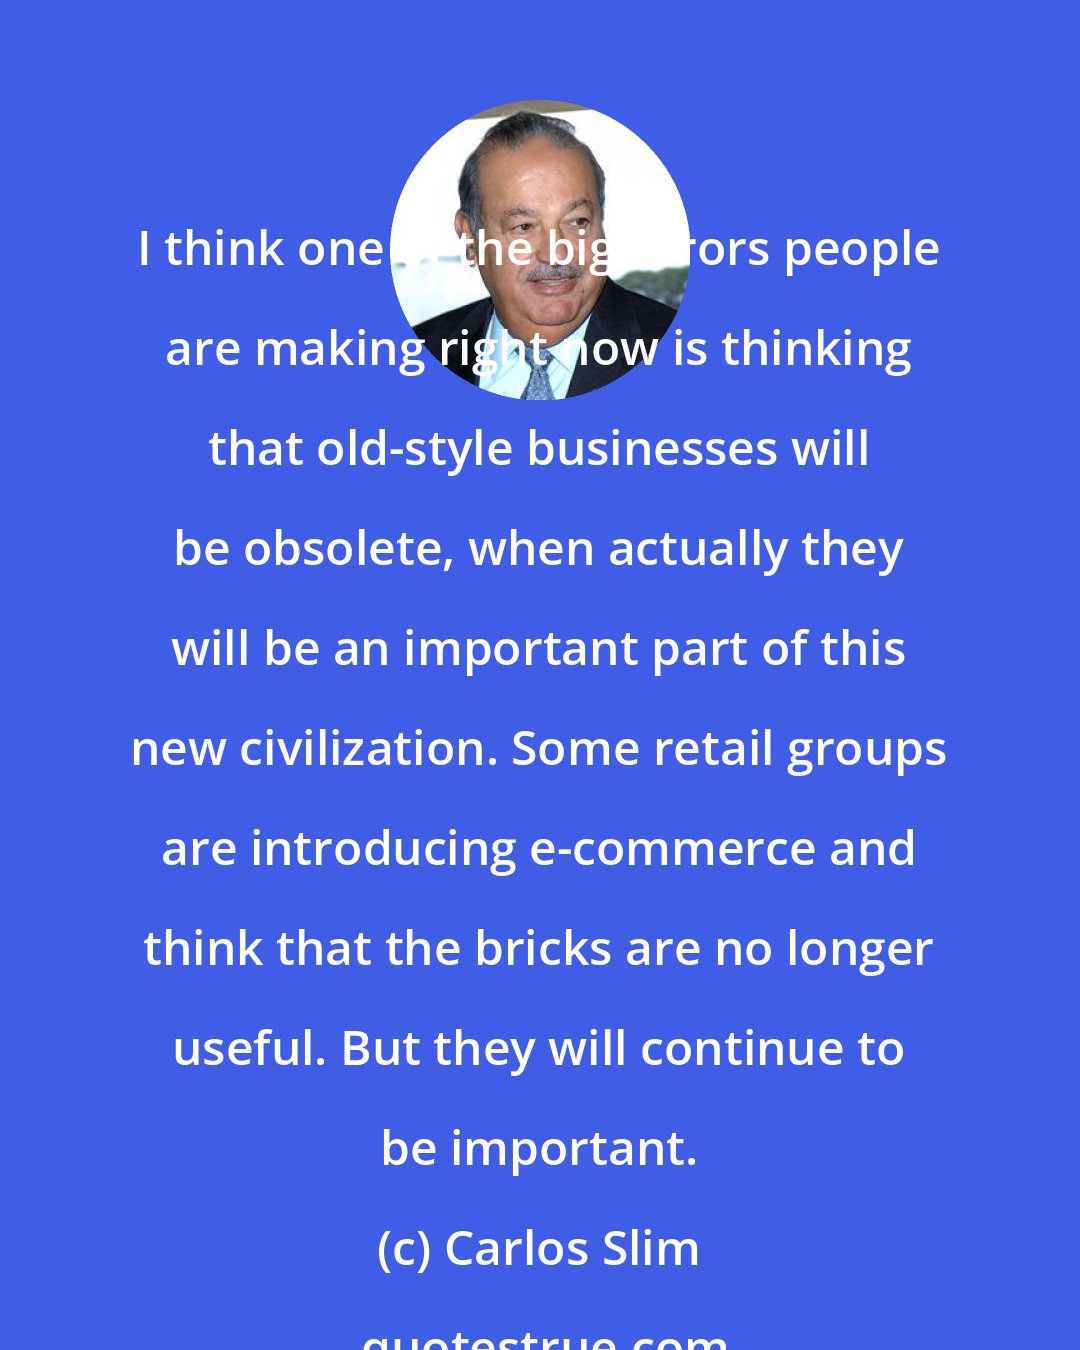 Carlos Slim: I think one of the big errors people are making right now is thinking that old-style businesses will be obsolete, when actually they will be an important part of this new civilization. Some retail groups are introducing e-commerce and think that the bricks are no longer useful. But they will continue to be important.